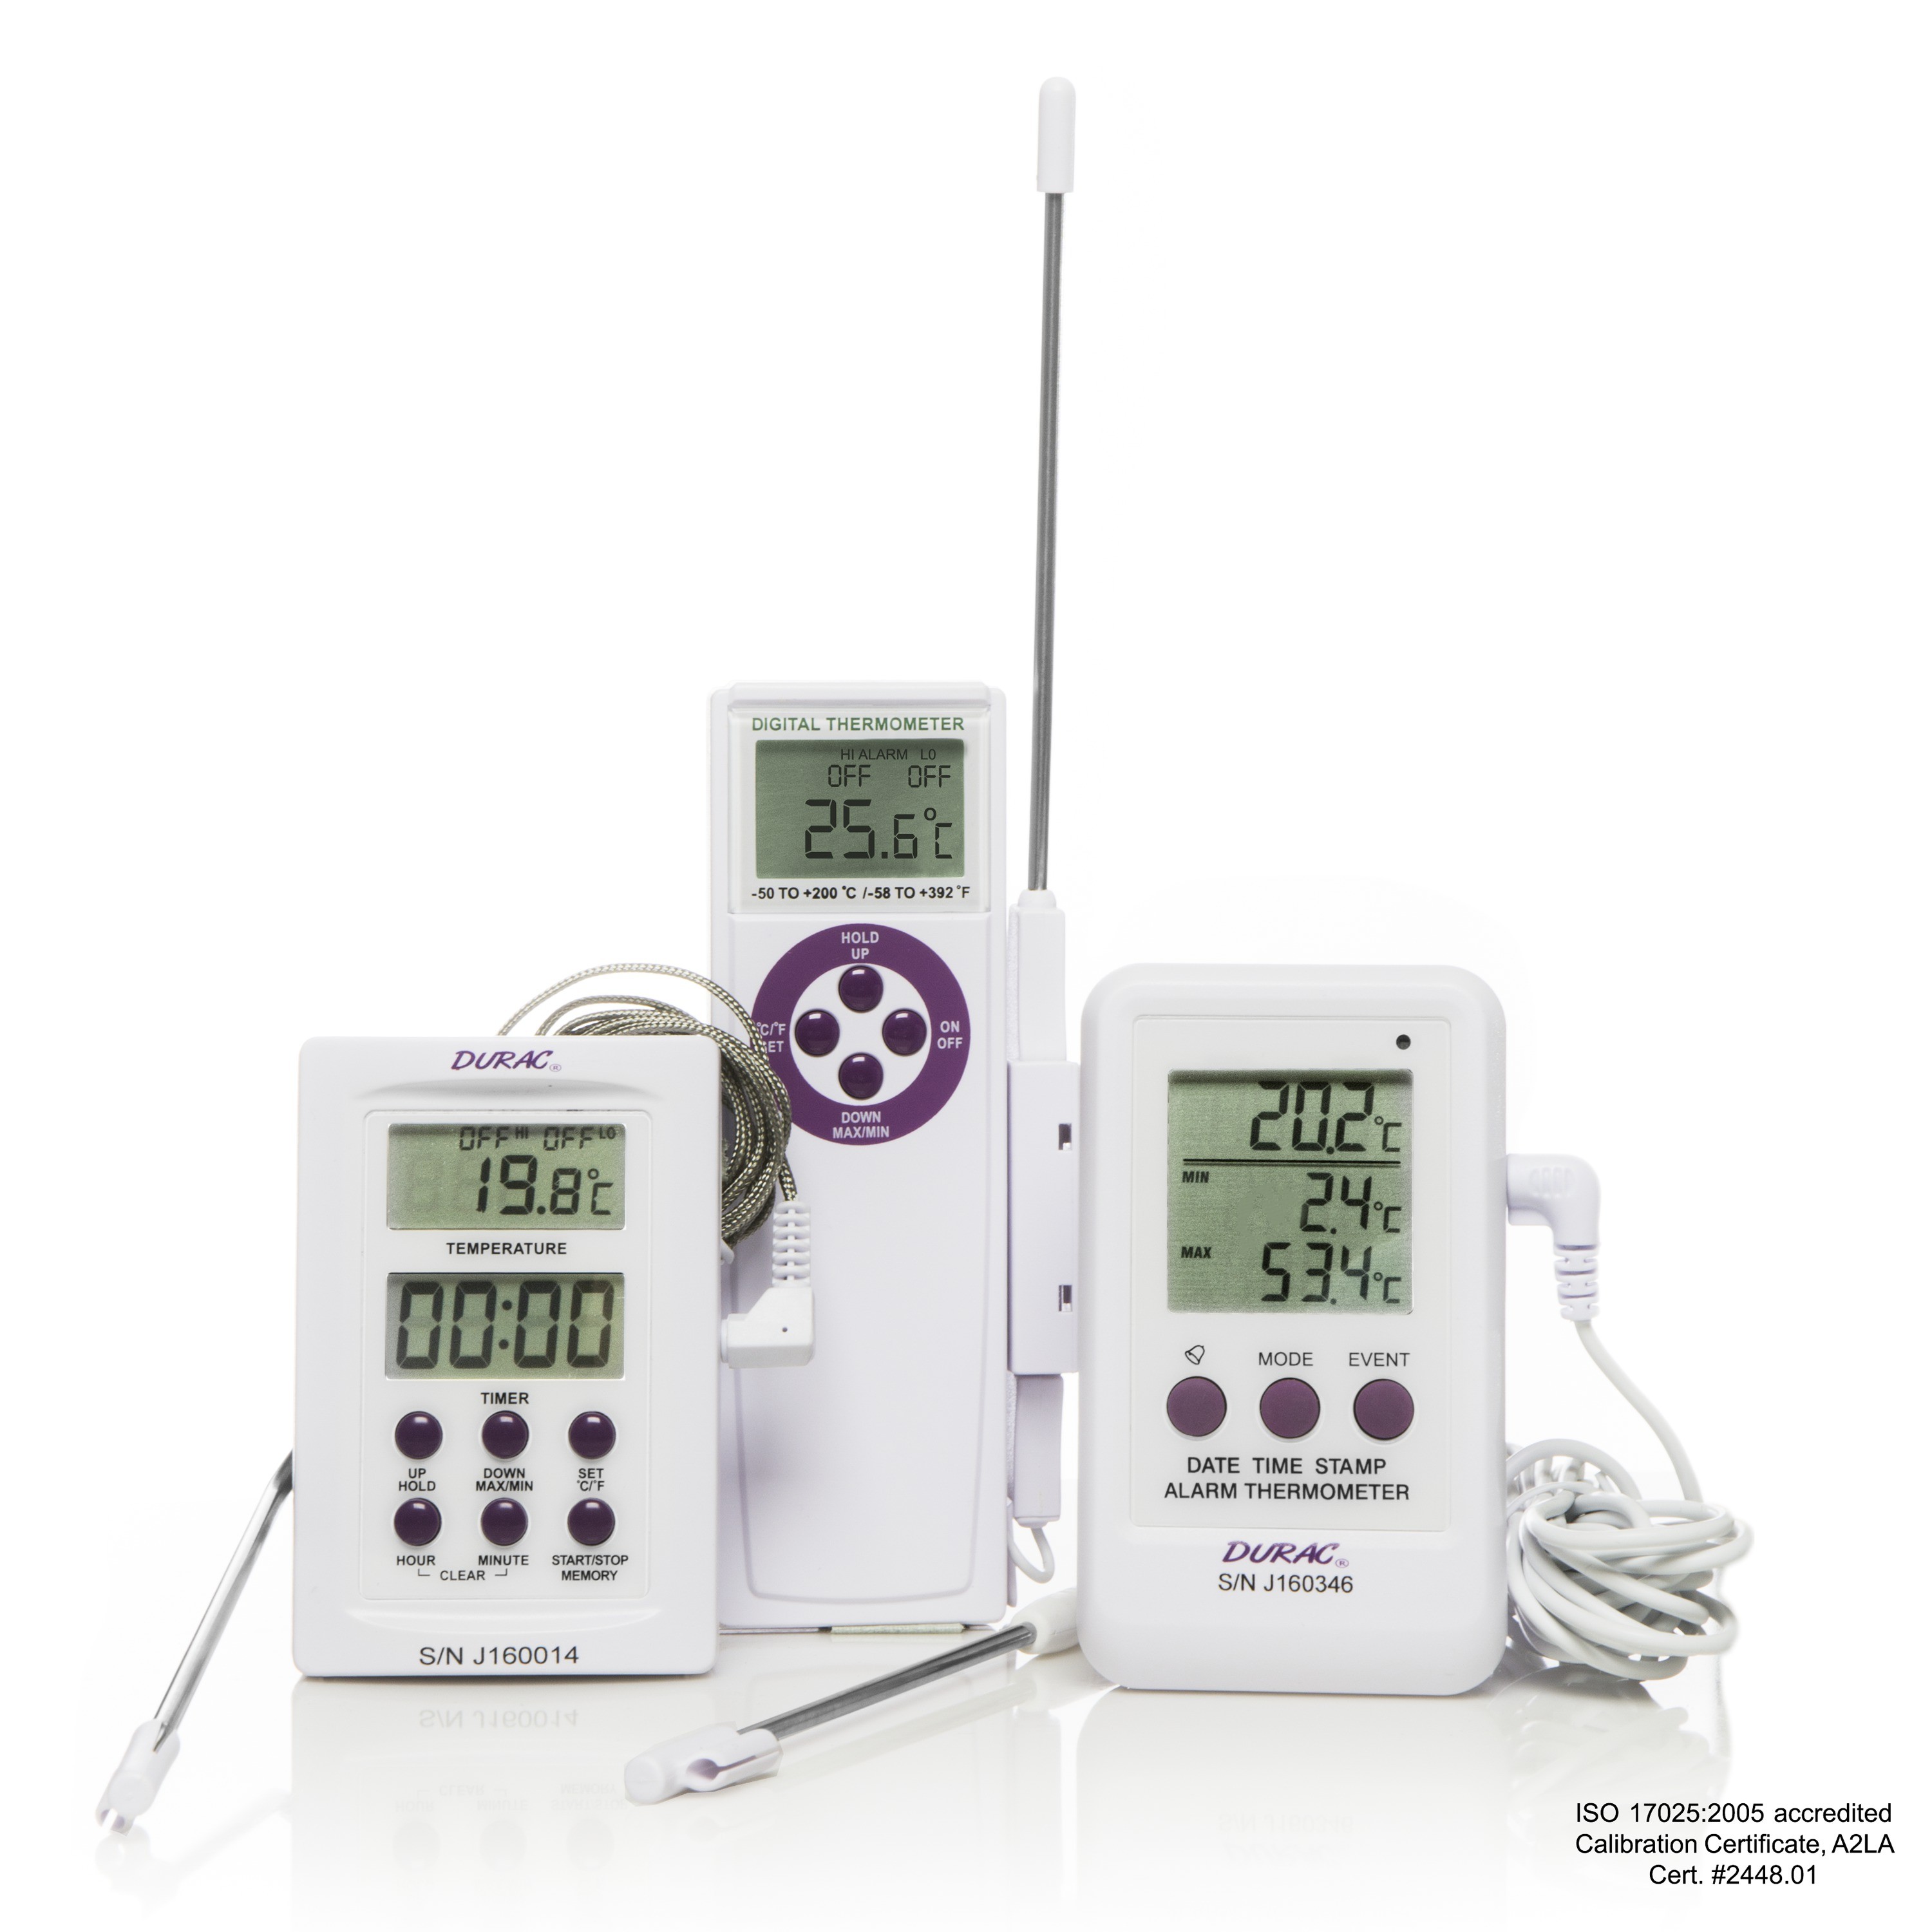 H-B DURAC Calibrated Electronic Thermometers with Stainless Steel Probe